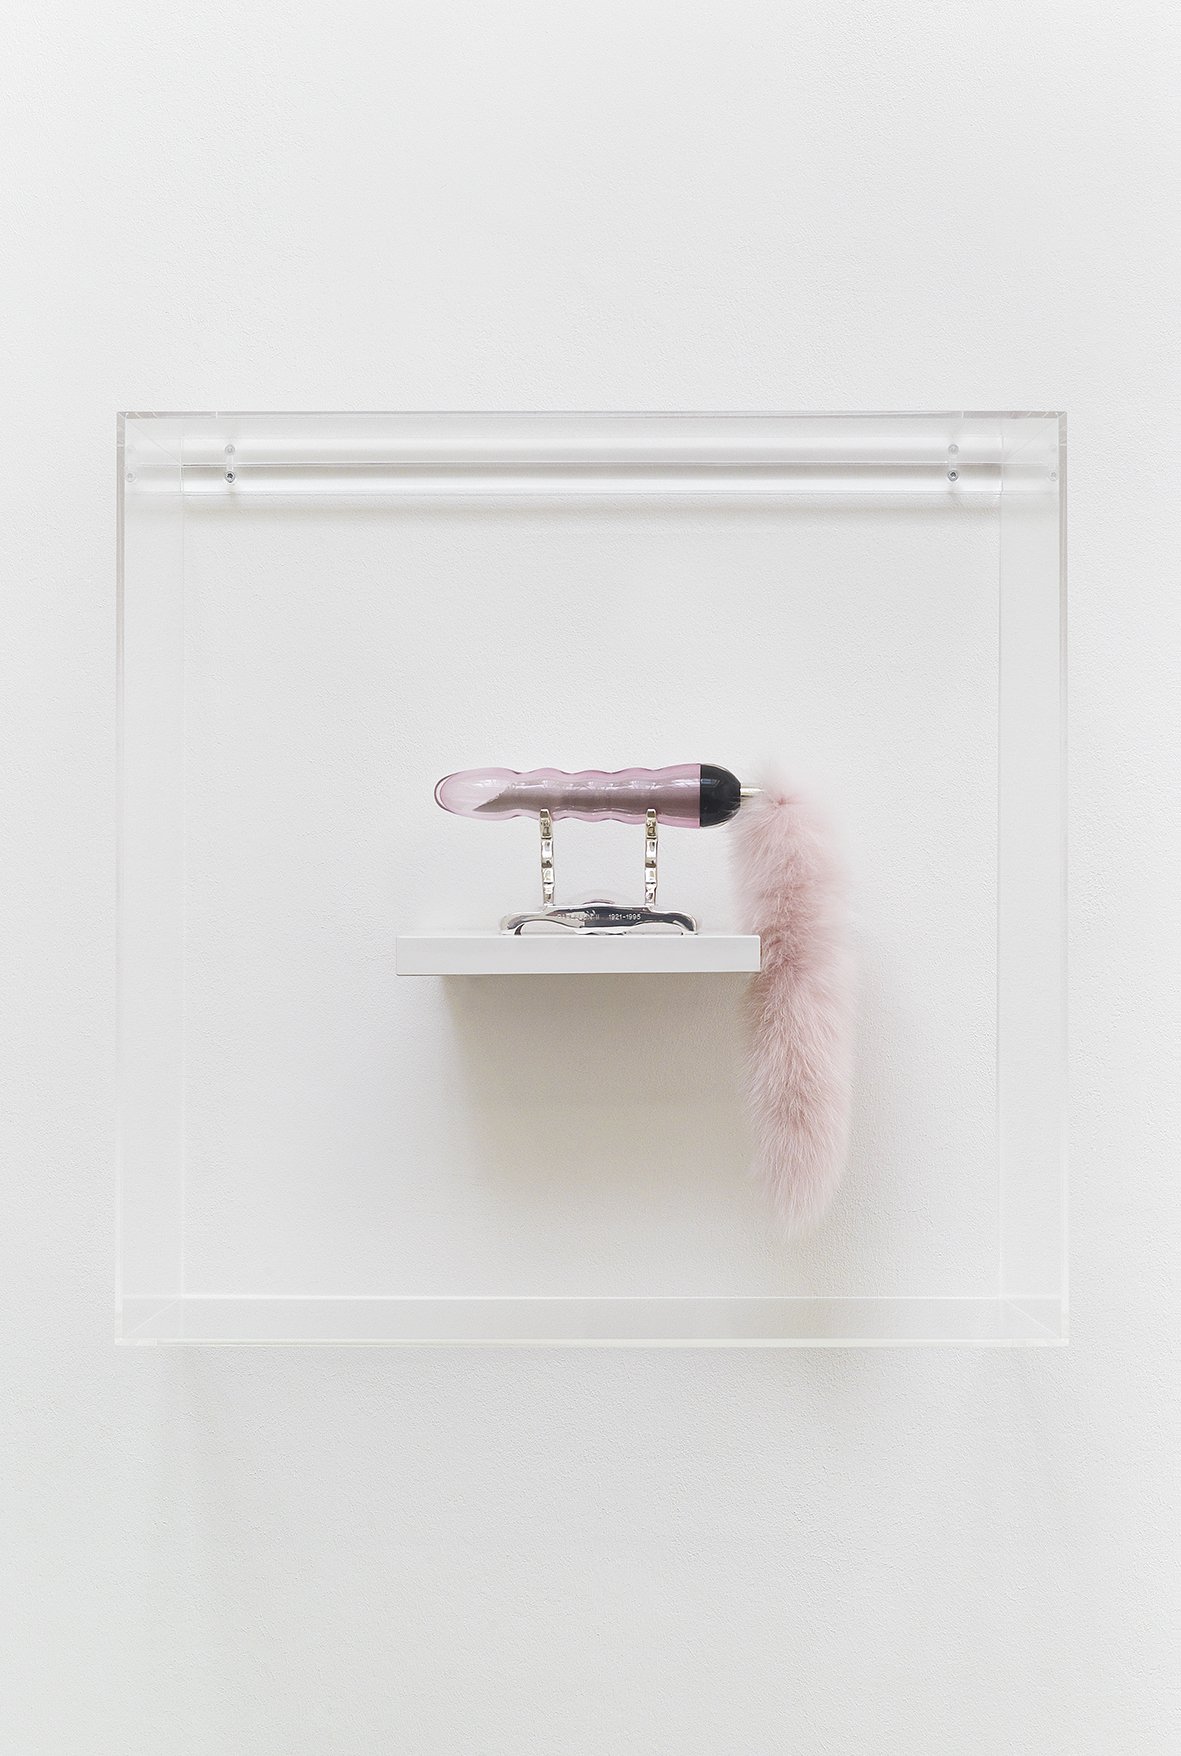 Banu Cennetoğlu &amp; Shiri Zinn, Pavilion II, Within Limits, 1921 – 1995, hand-blown glass, dust, eather, silverplated stand, dimensions variable, 2010